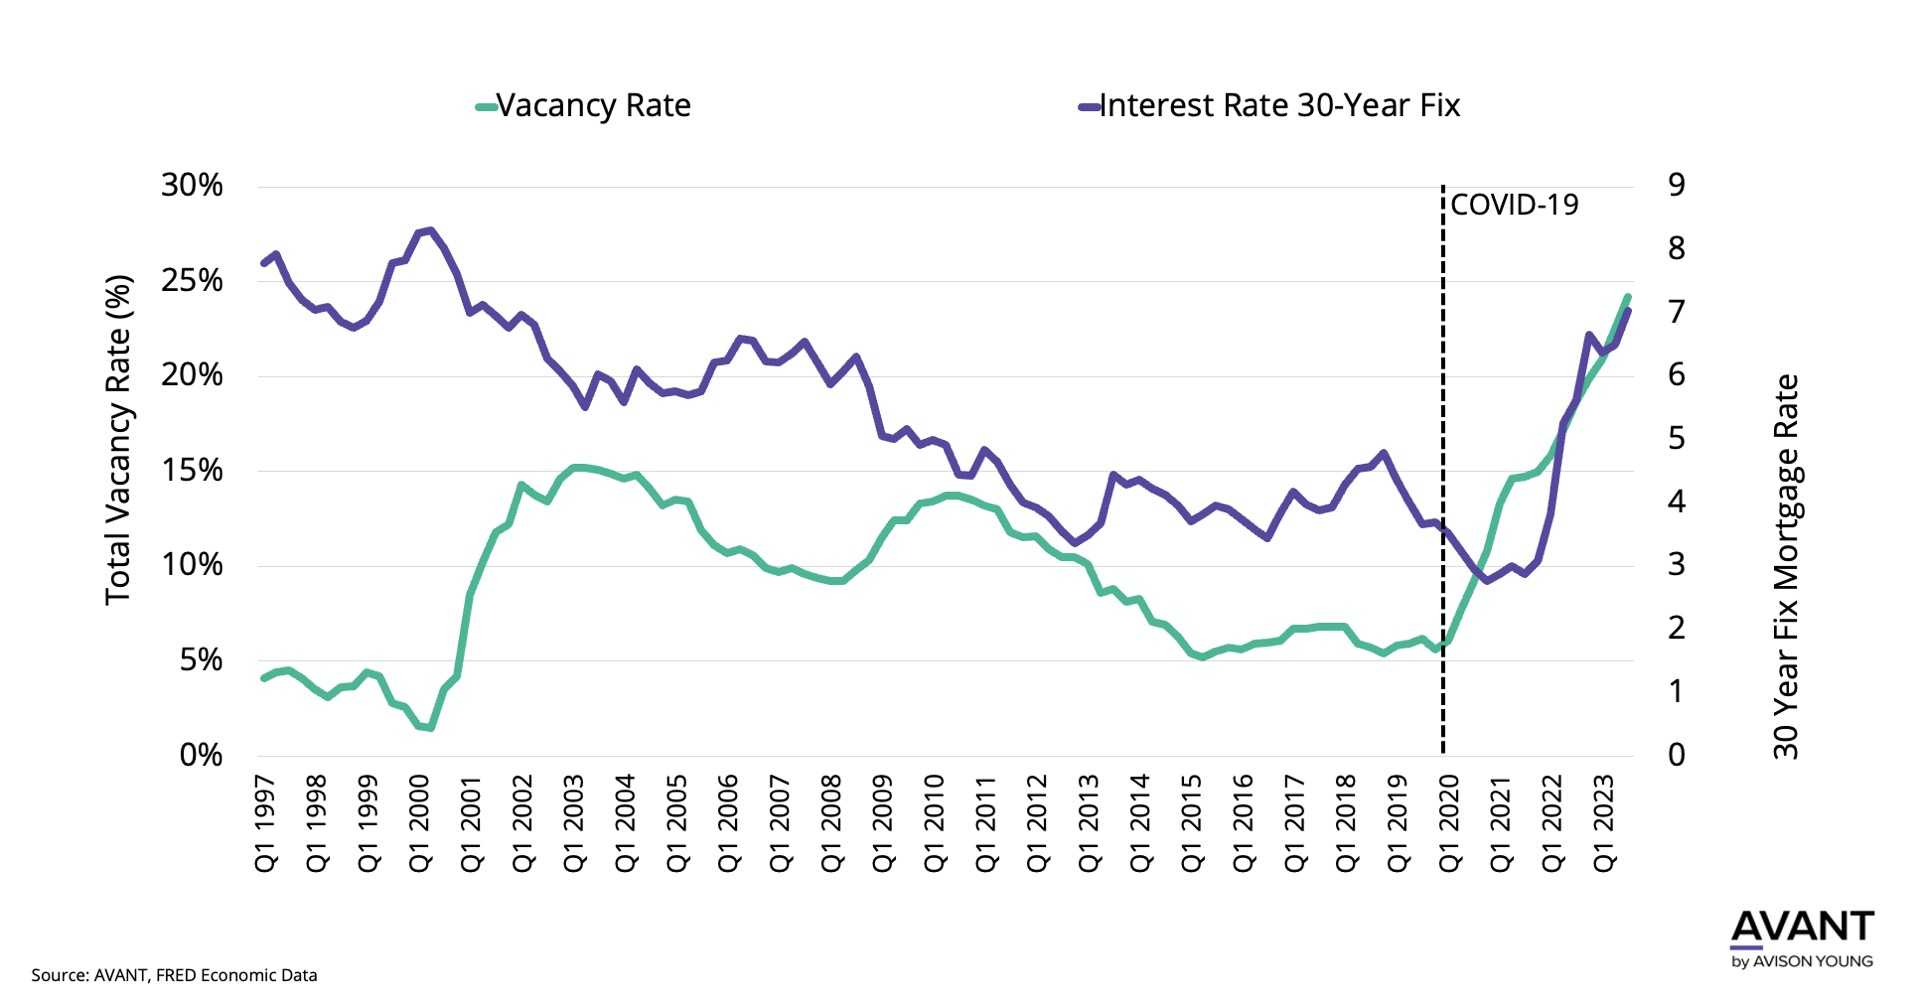 San Francisco office vacancy and 30-year mortgage interest rates converge following the Covid-19 pandemic